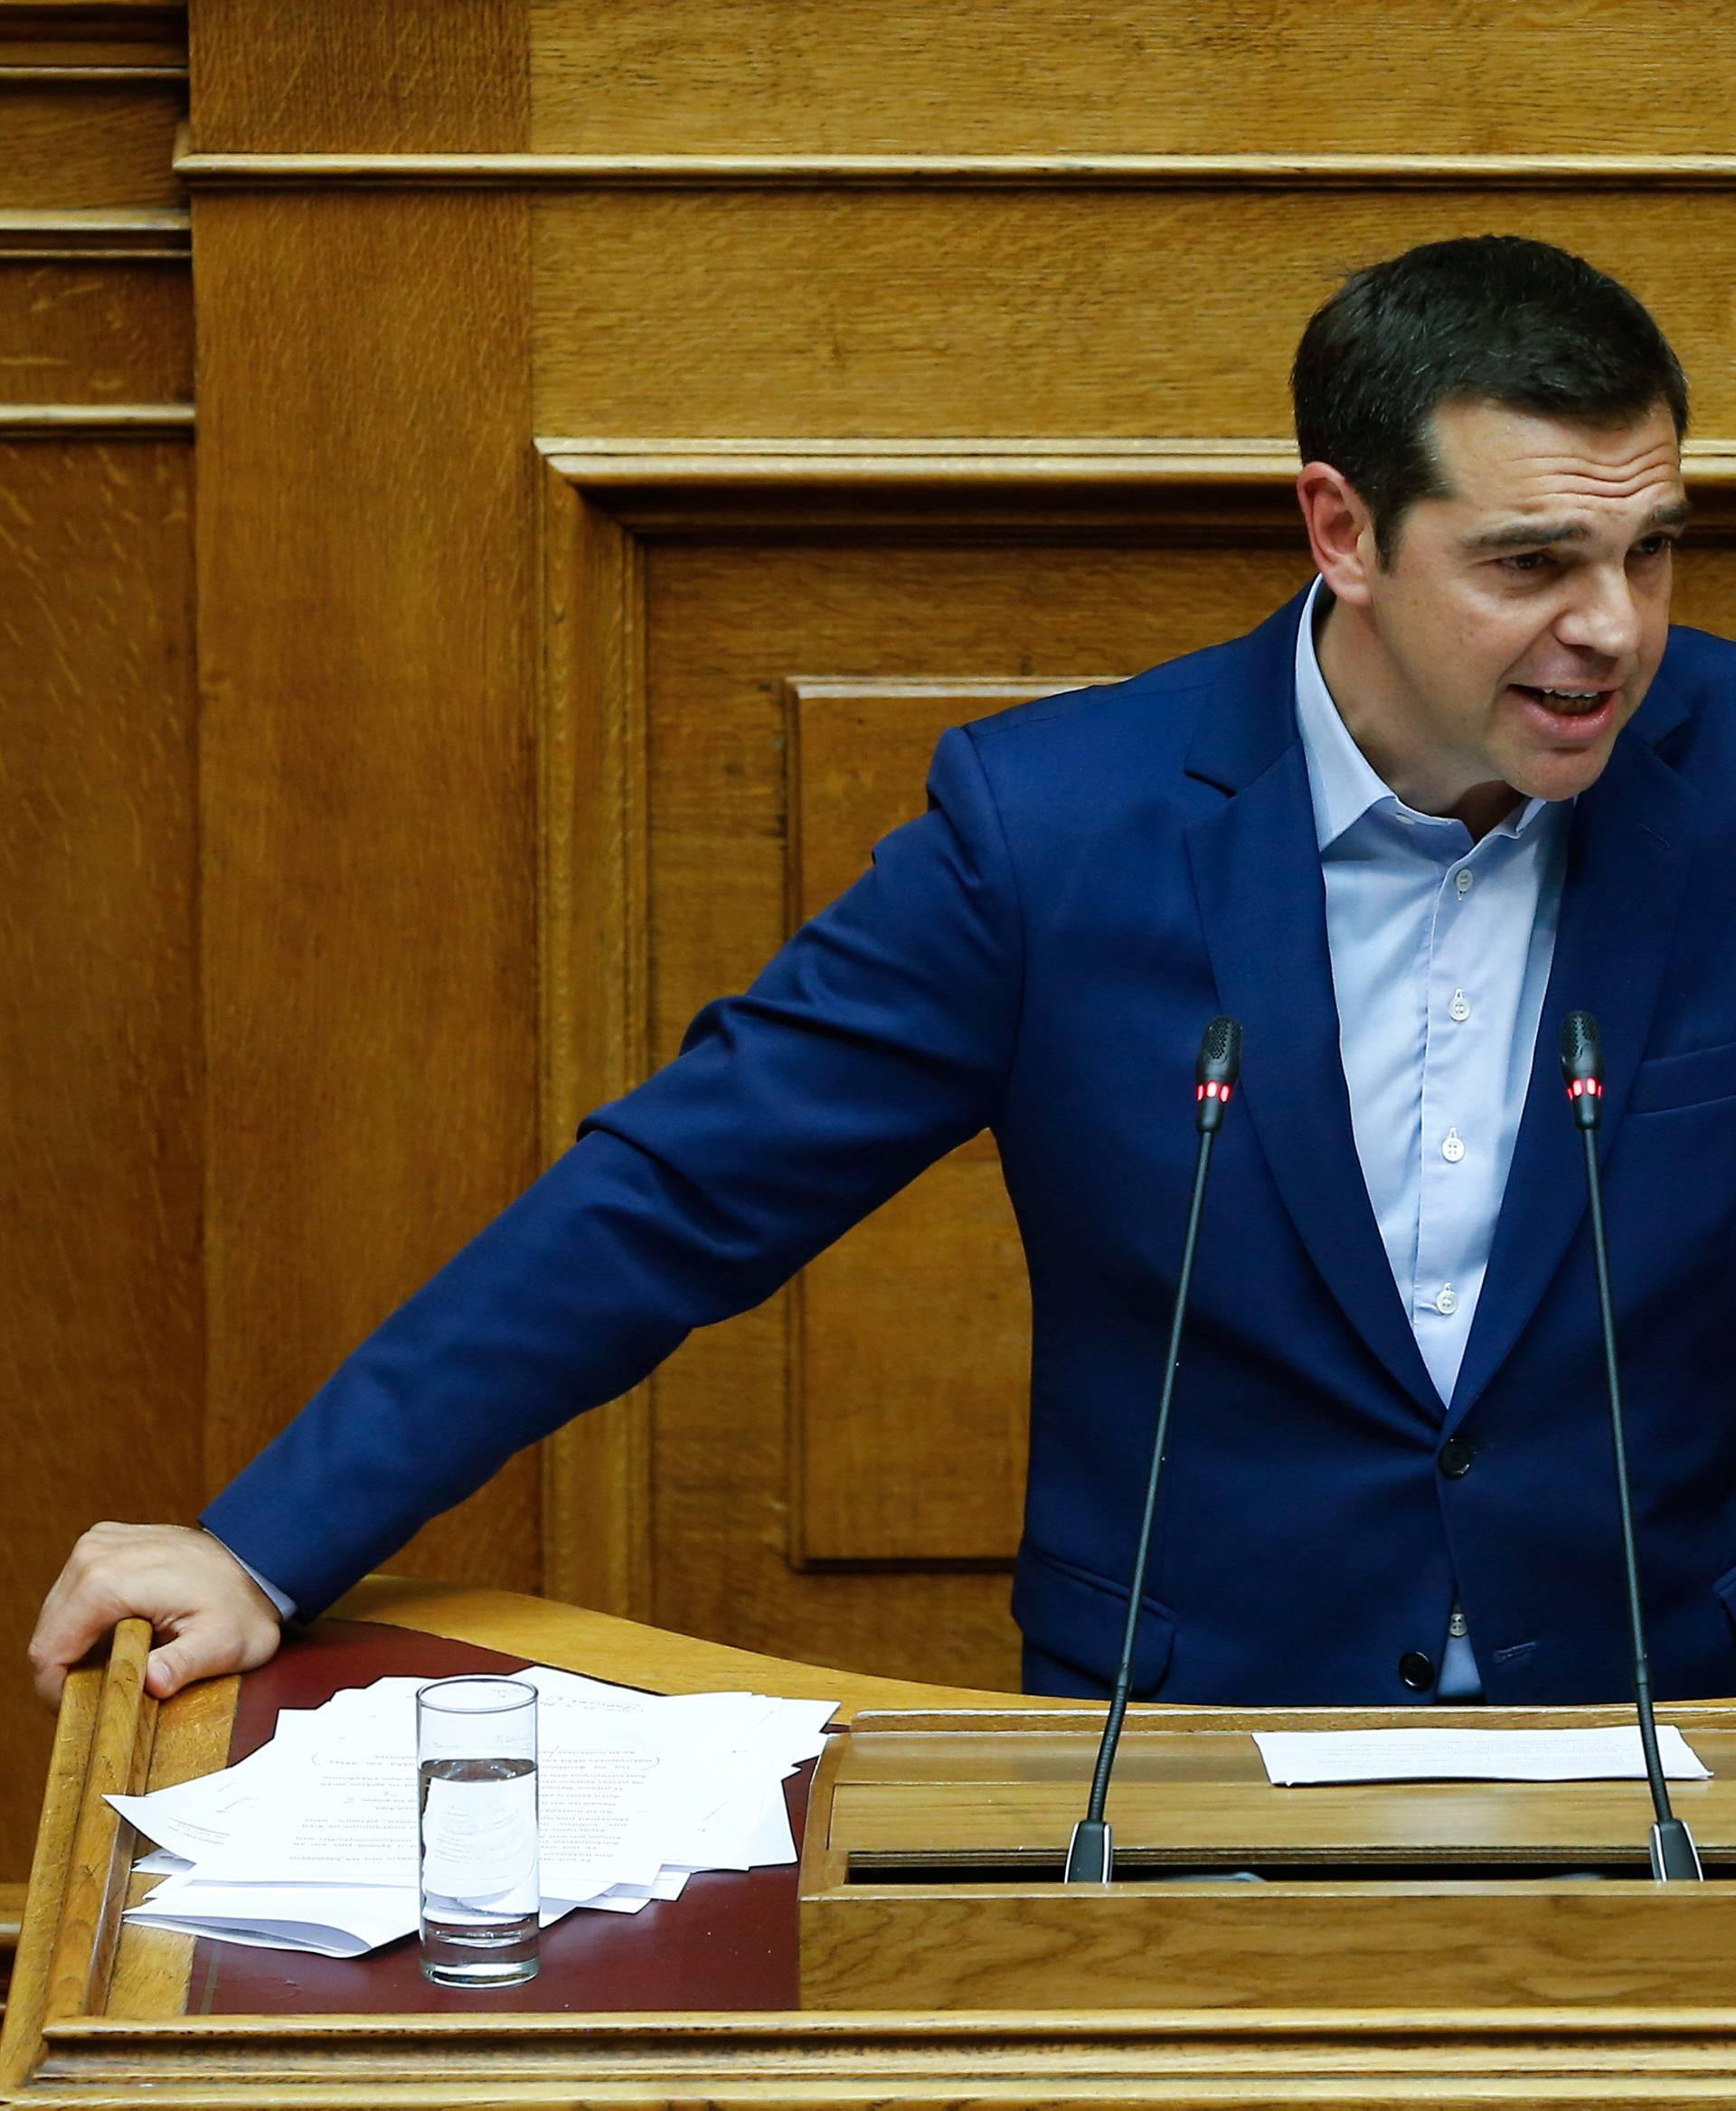 Greek Prime Minister Alexis Tsipras addresses lawmakers during a parliamentary session before a vote following a motion of no confidence by the main opposition in dispute over a deal on neighbouring Macedonia's name, in Athens